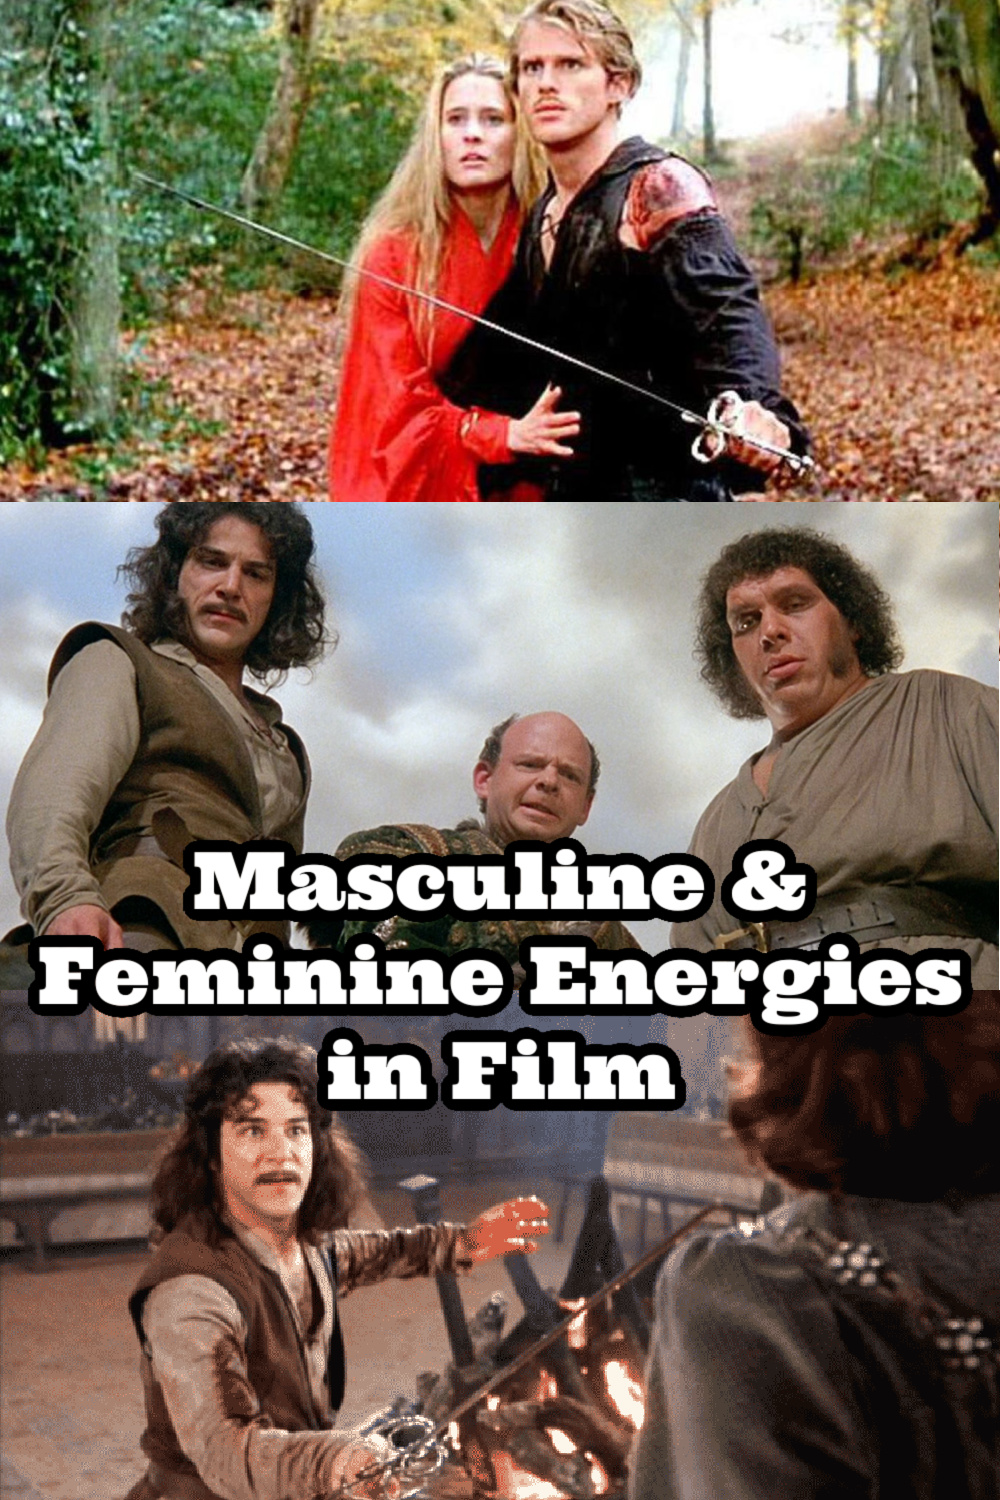 healthy masculinity vs toxic masculinity, healthy masculine men, healthy masculine energy traits, masculine purpose, masculine energy purpose, wounded masculine energy in a man, why men wont commit, feminine urge to test a mans strength, feminine testing the masculine, how the feminine tests the masculine, feminine testing, the princess bride film analysis, understanding masculine and feminine energy, sexual polarity, creating sexual polarity, sexual polarity in relationships, sexual polarity, sexual polarity masculine feminine, masculine and feminine examples, Everyday starlet, sarah blodgett,